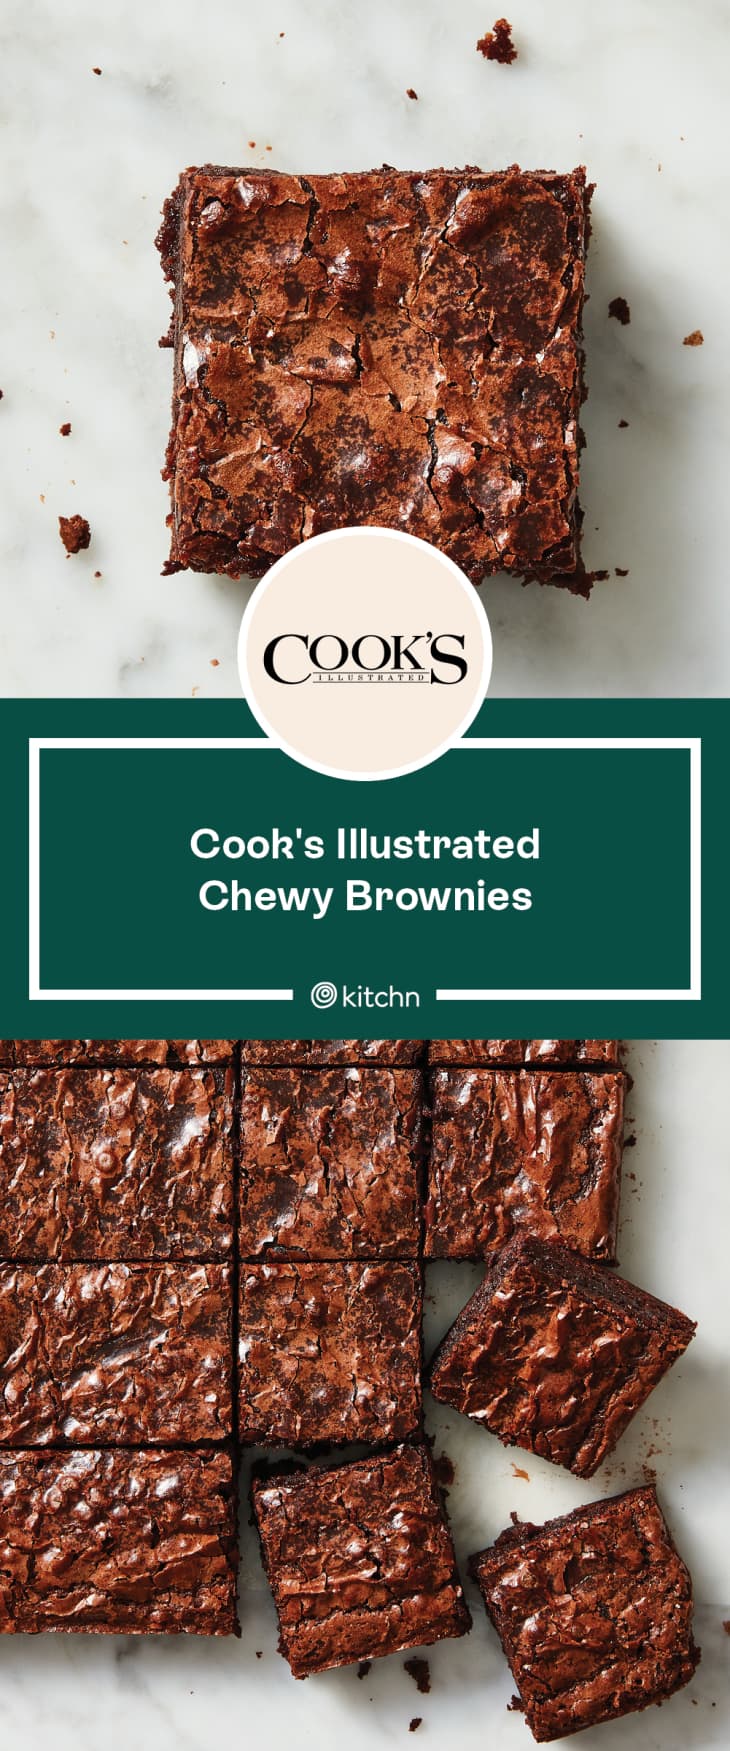 A graphic featuring overhead photos of a brownies made with a recipe from Cook's Illustrated.